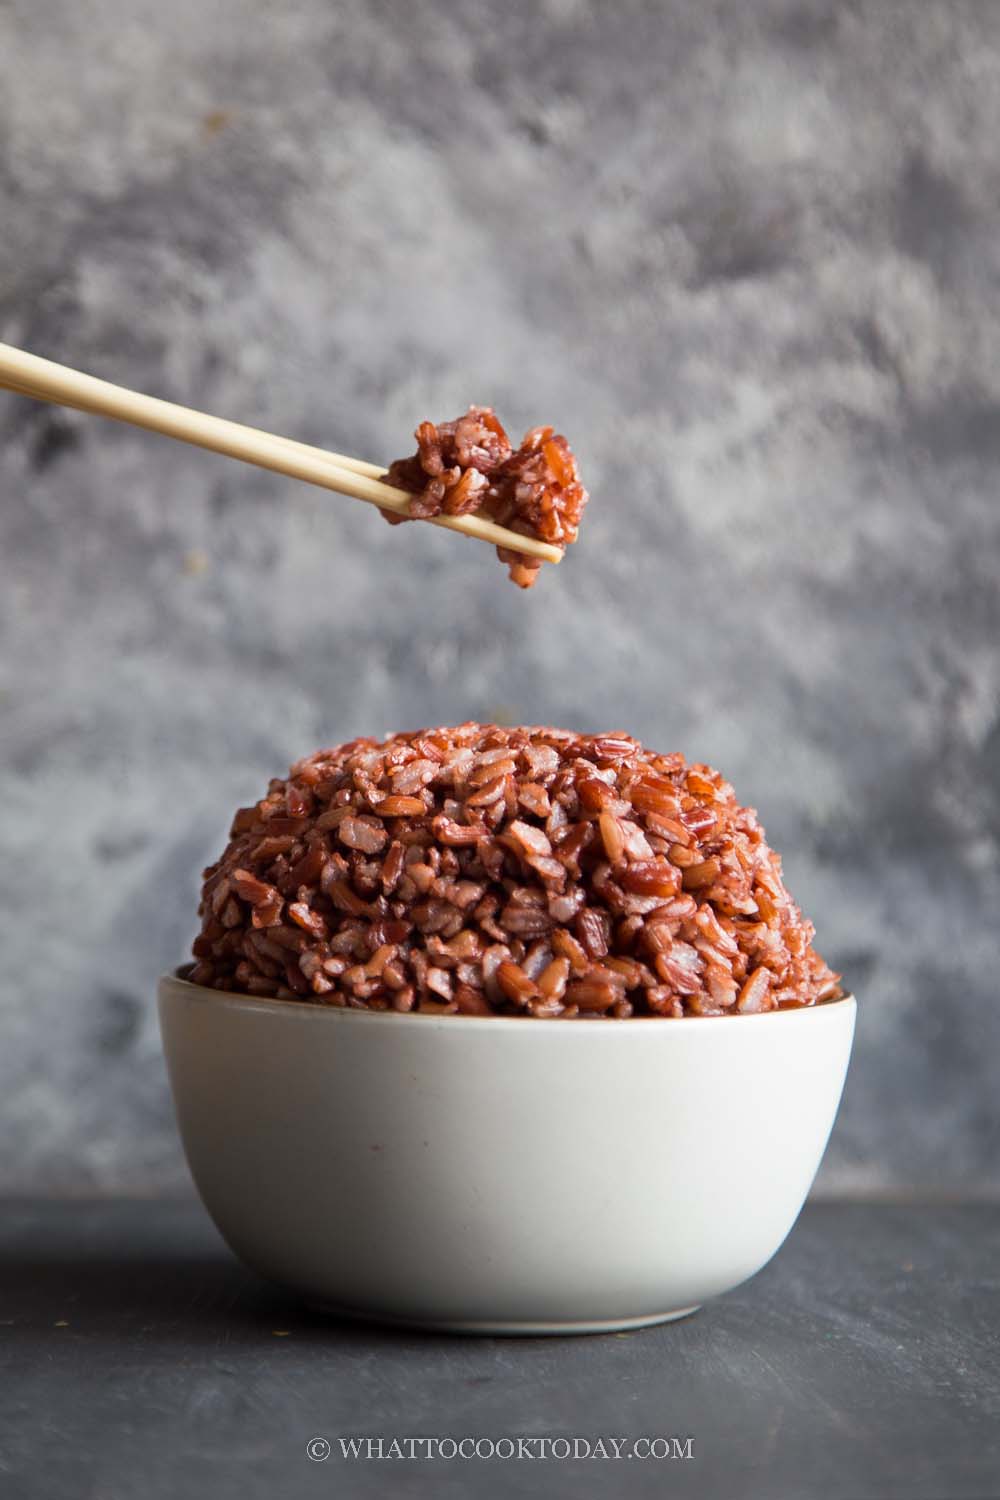 https://whattocooktoday.com/wp-content/uploads/2021/02/red-rice-7.jpg